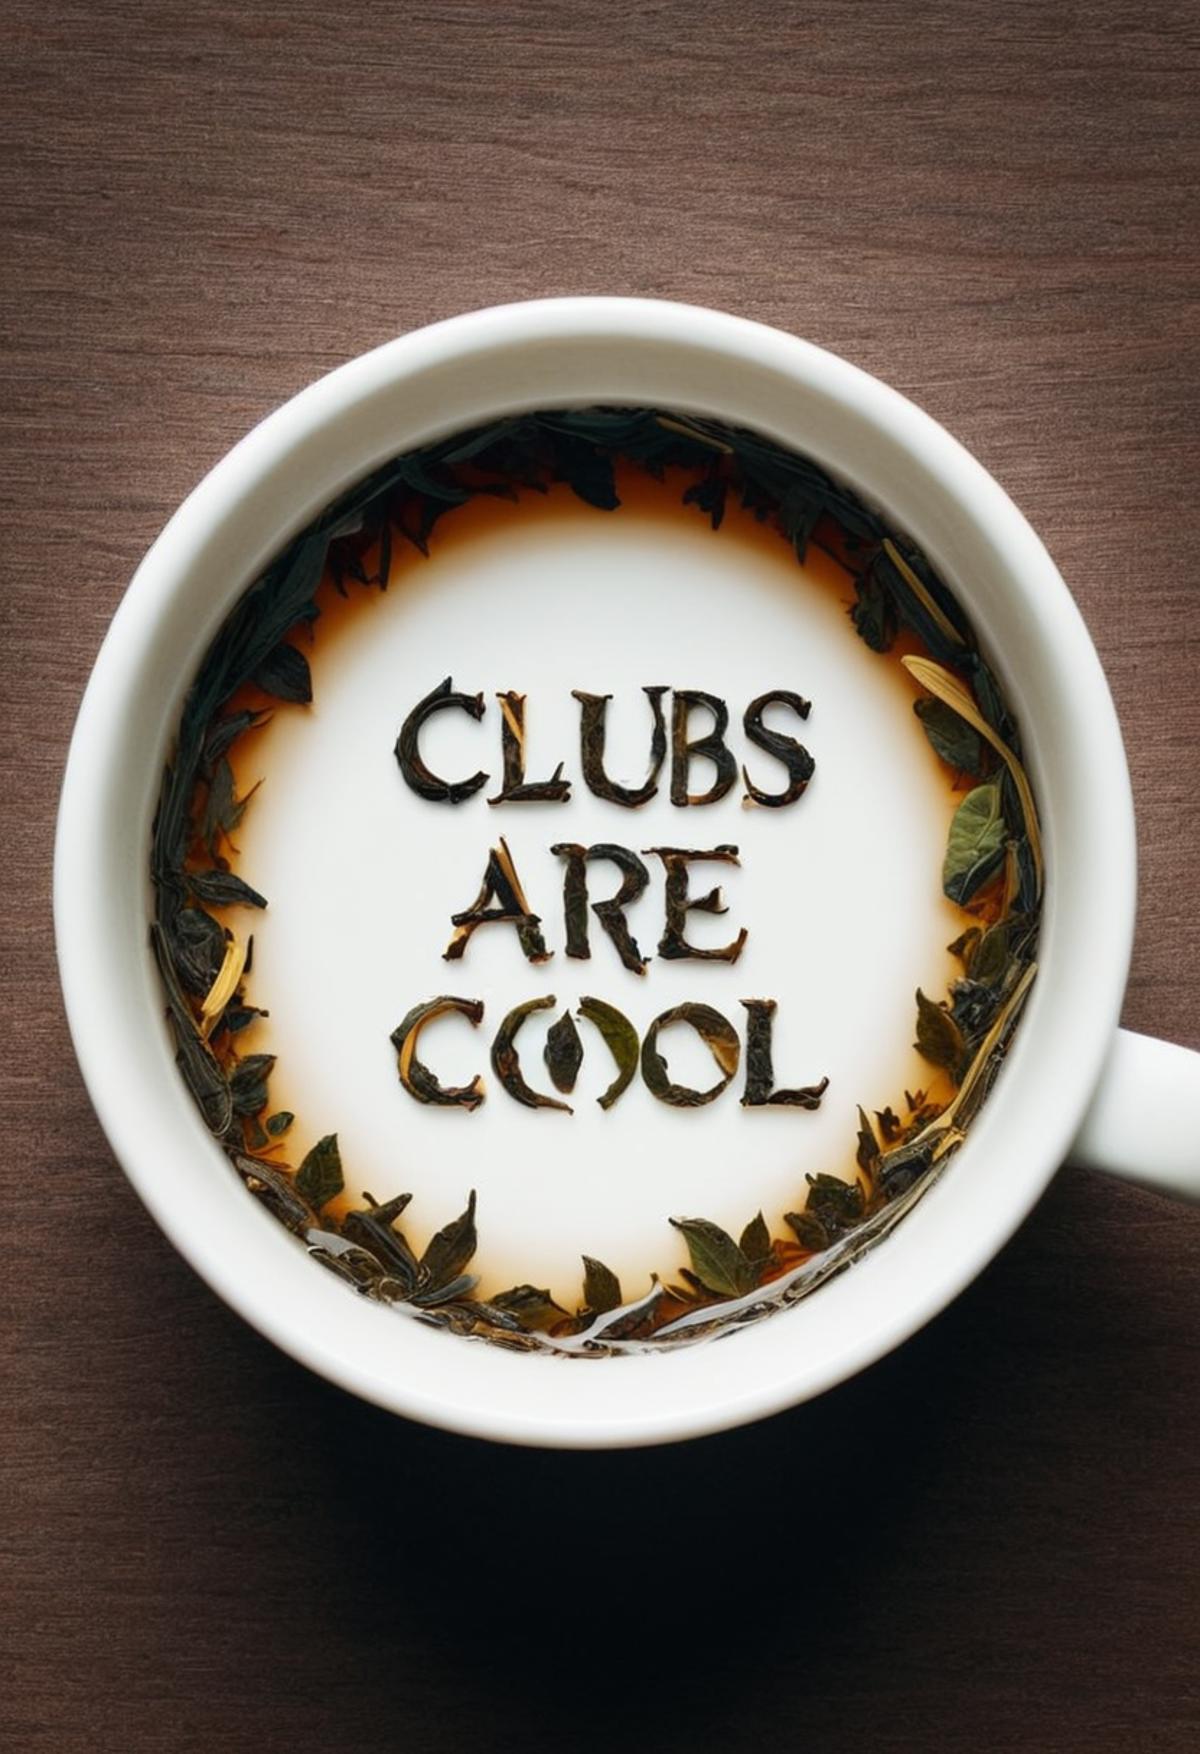 A cup of coffee with a saying on it that says "Clubs are cool."